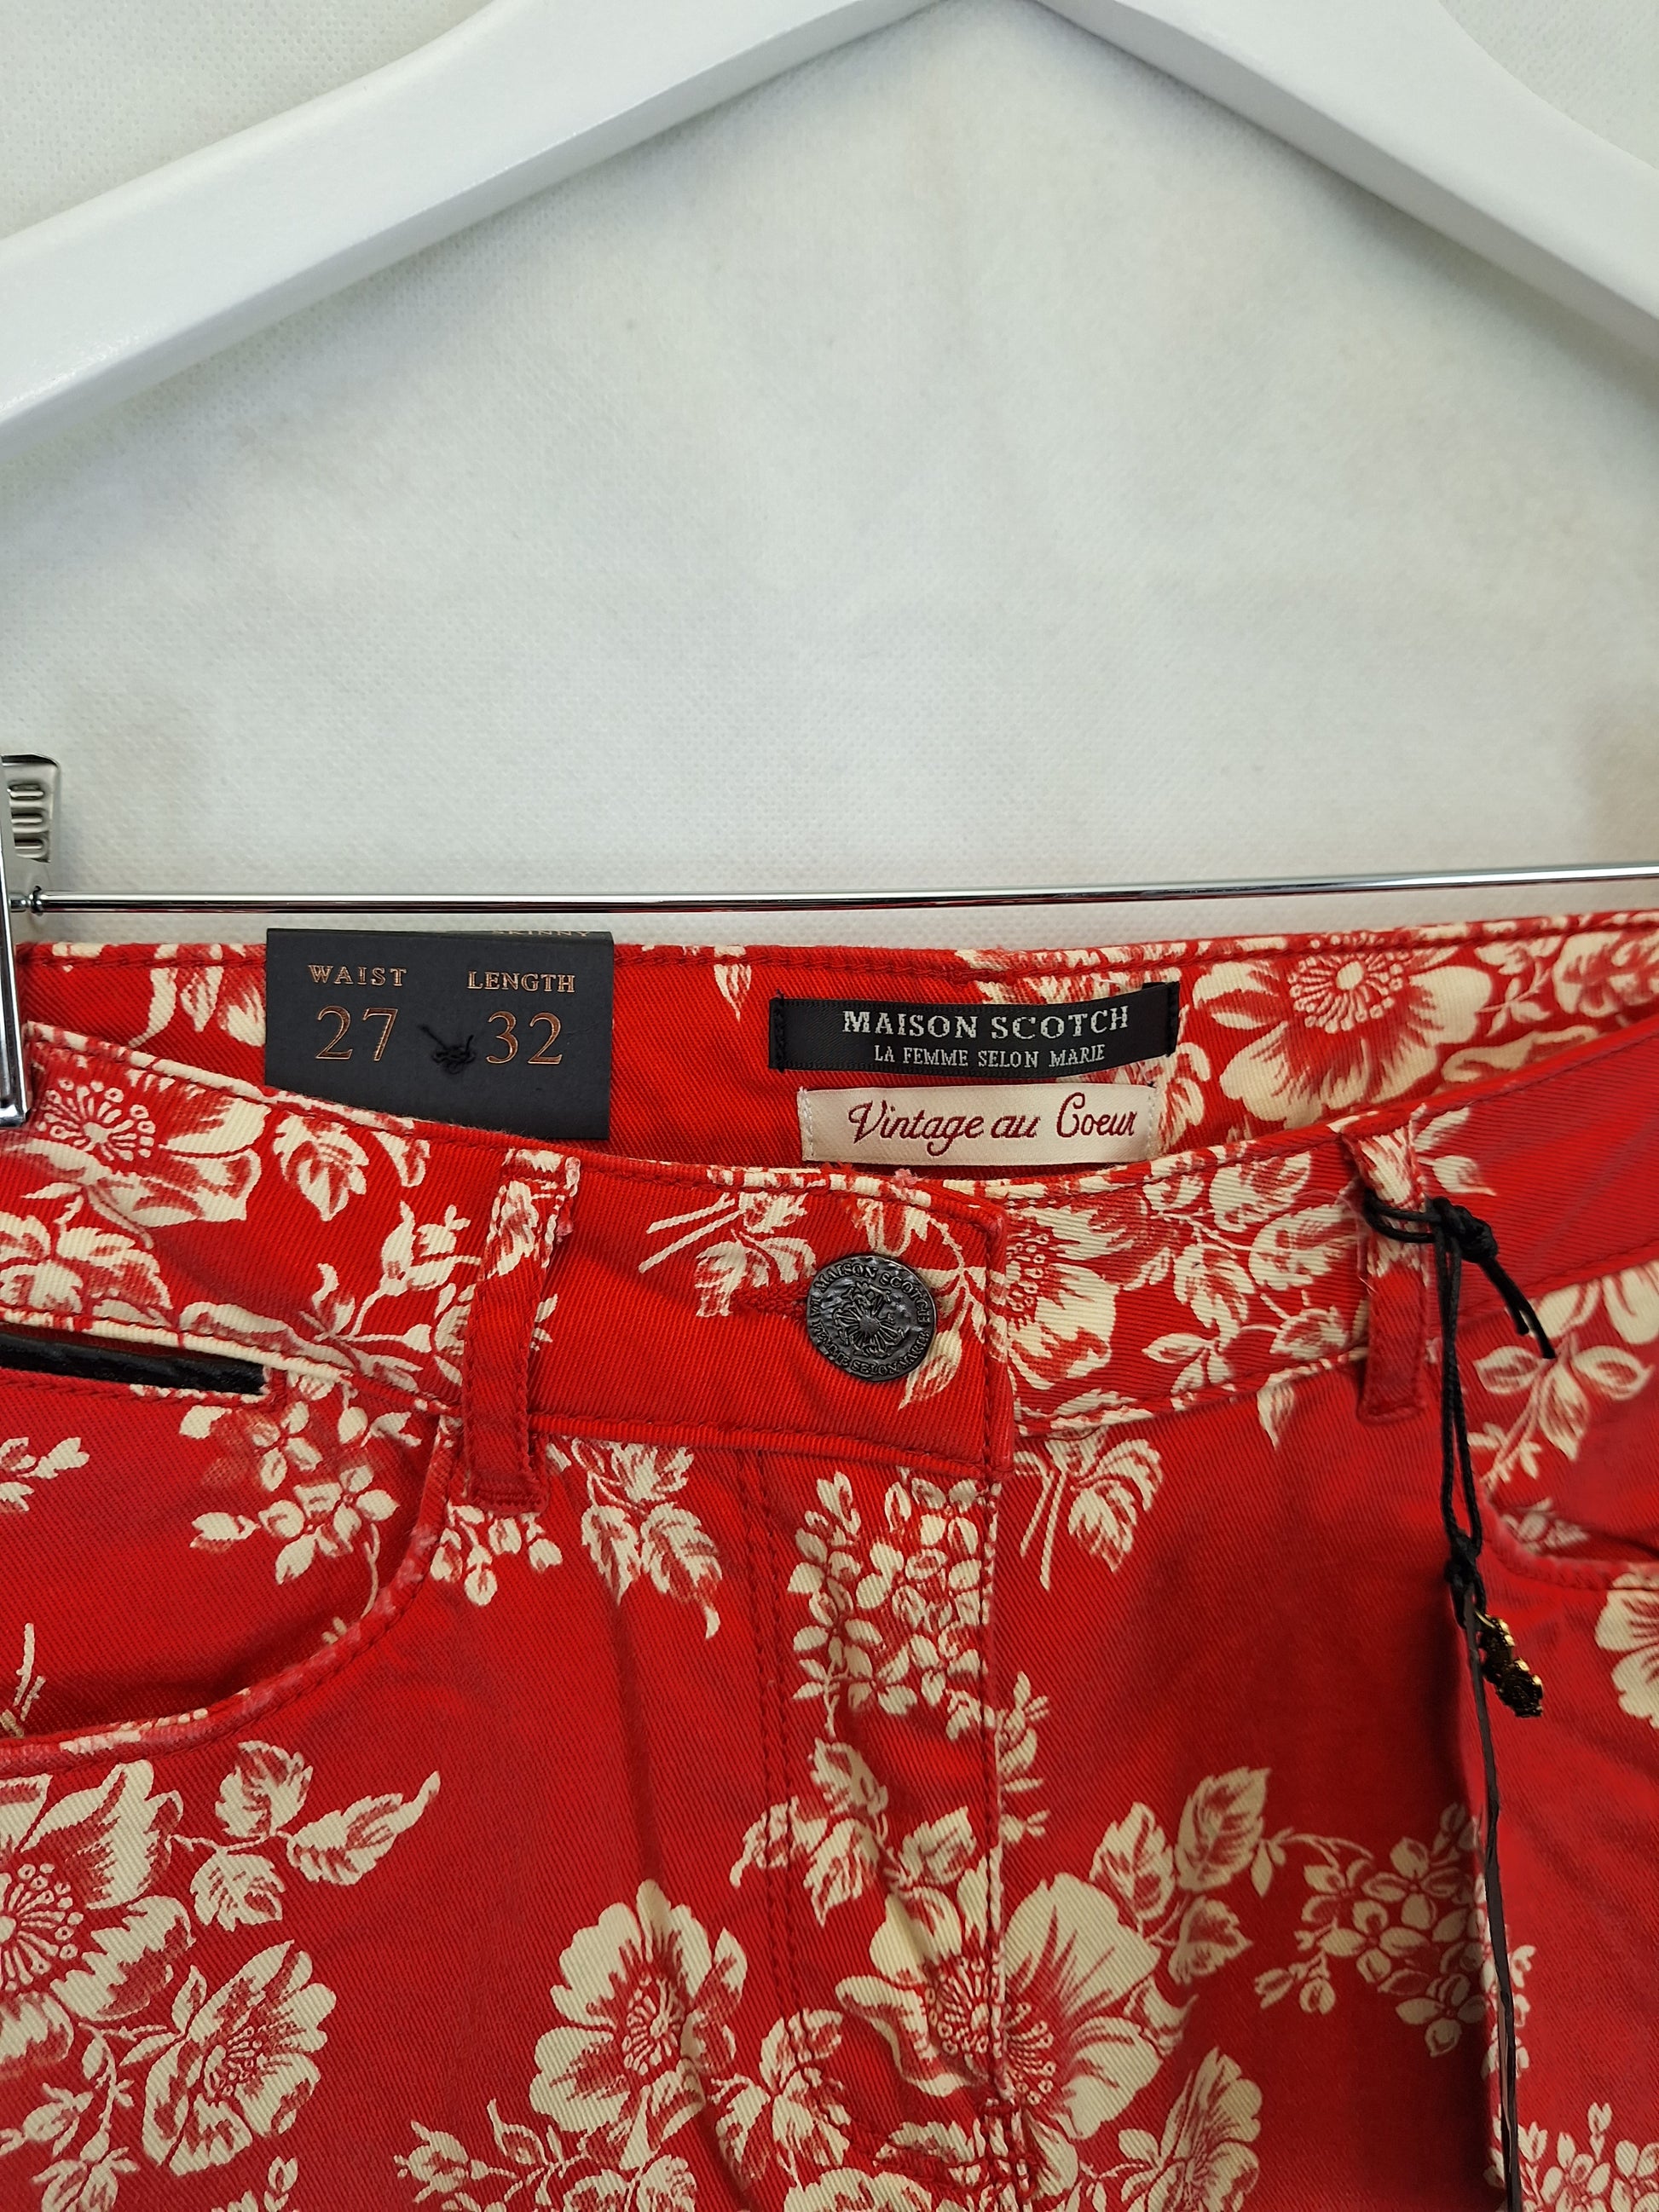 Scotch & Soda Hawaii Print Skinny Denim Jeans Size 8 by SwapUp-Online Second Hand Store-Online Thrift Store